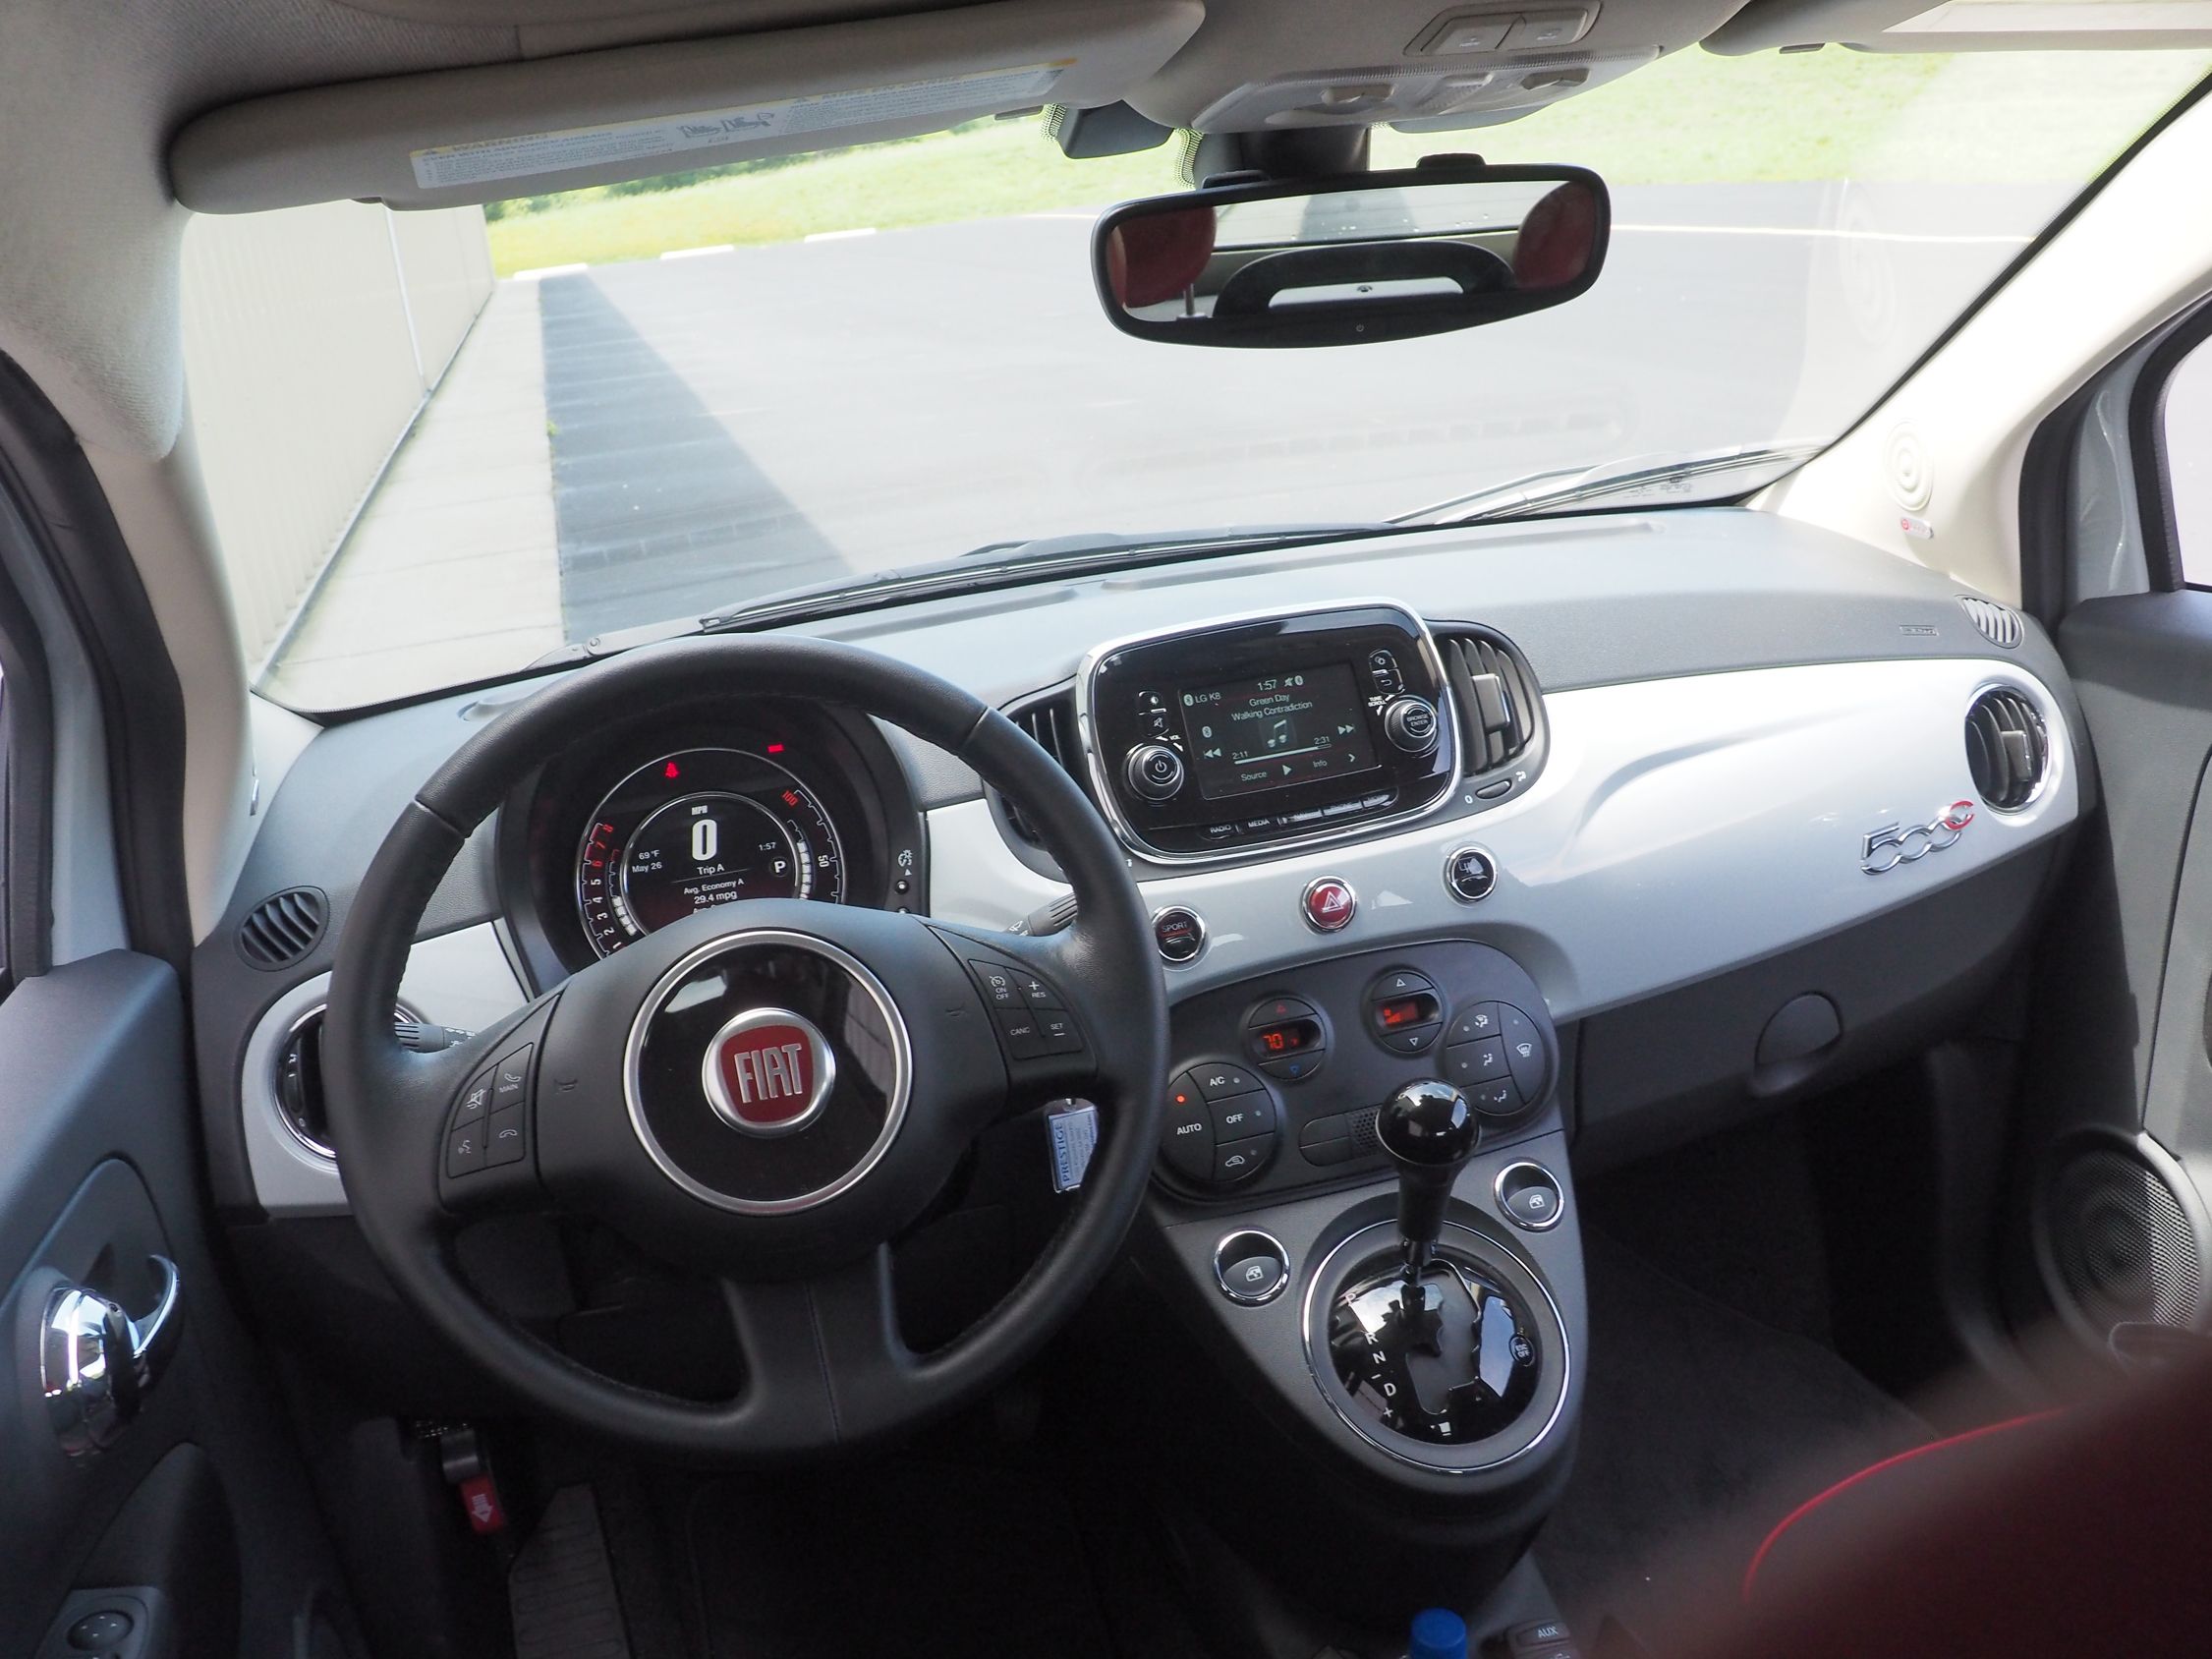 This Fiat 500C features a nice interior